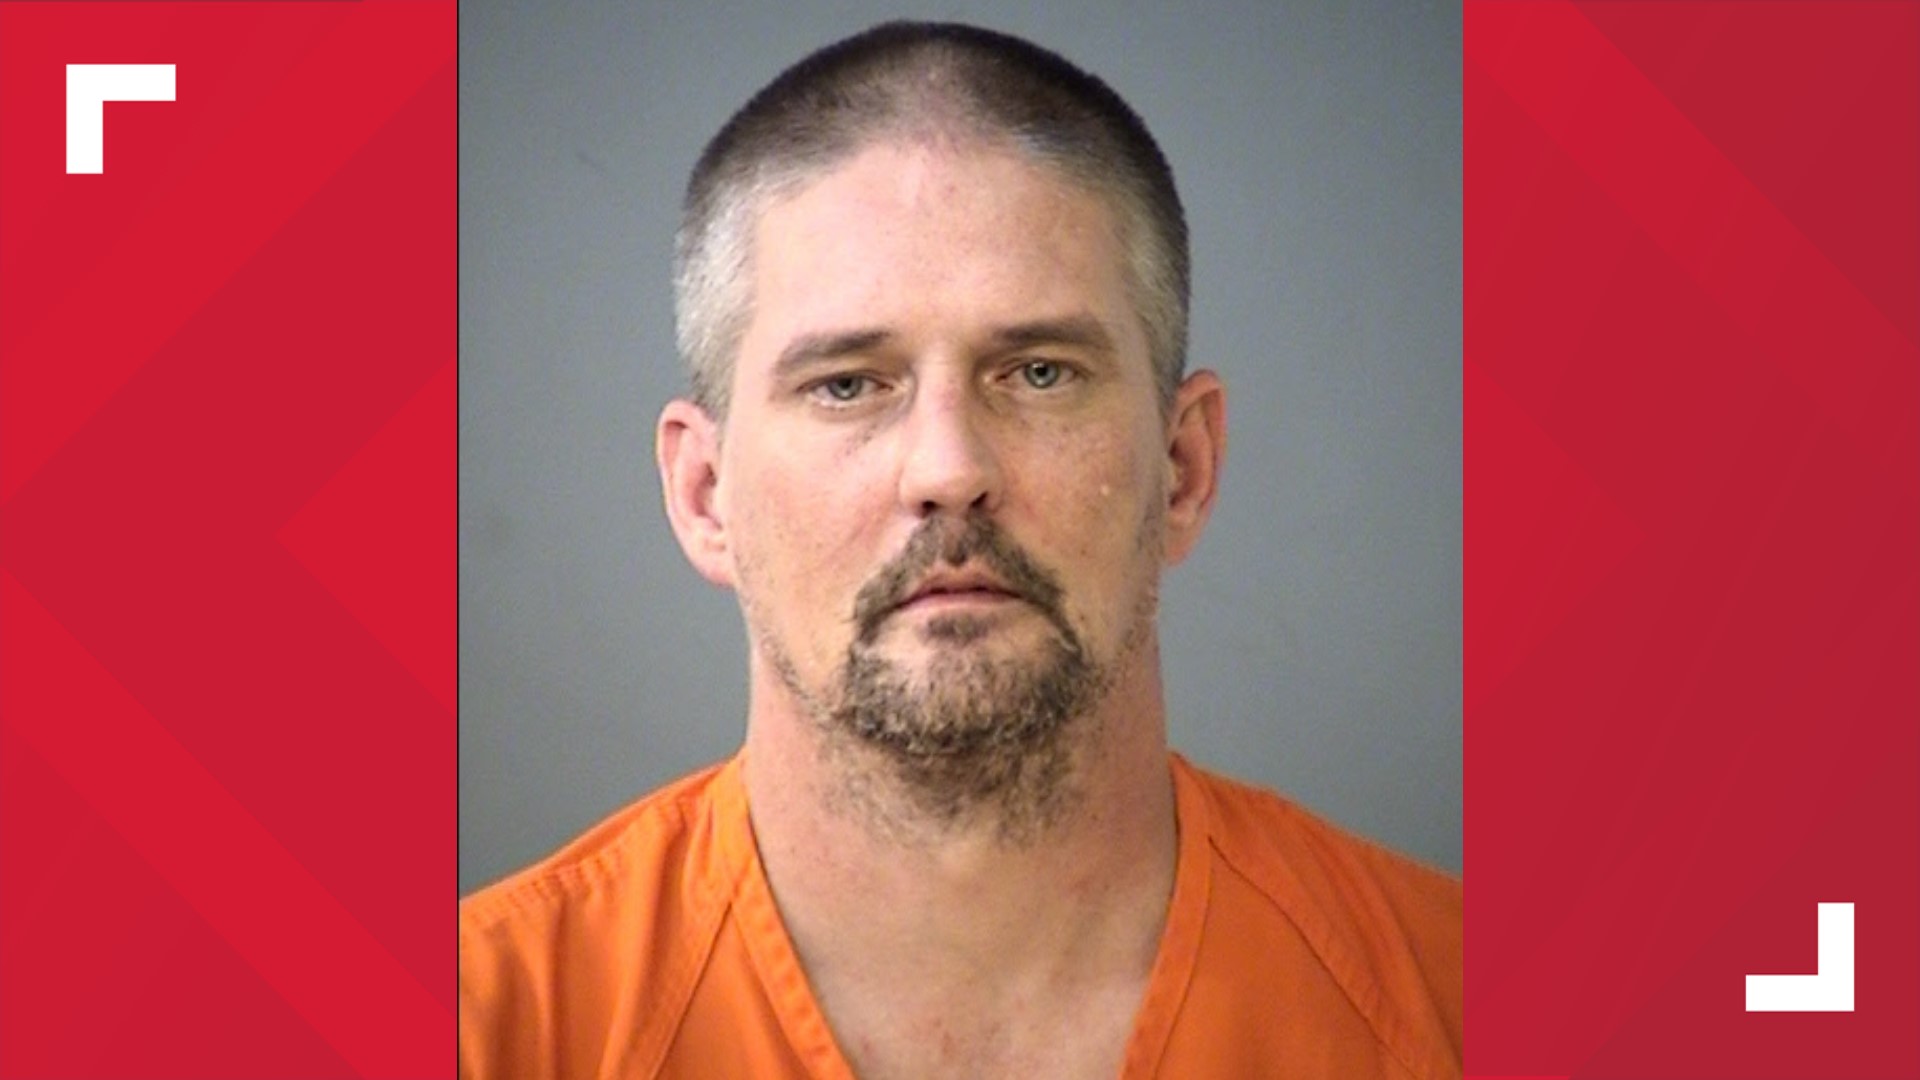 Investigators charged Jason Phipps in the July 2020 murder, alleging the shooting was the violent end to an argument over his wife not wanting him to have guns.